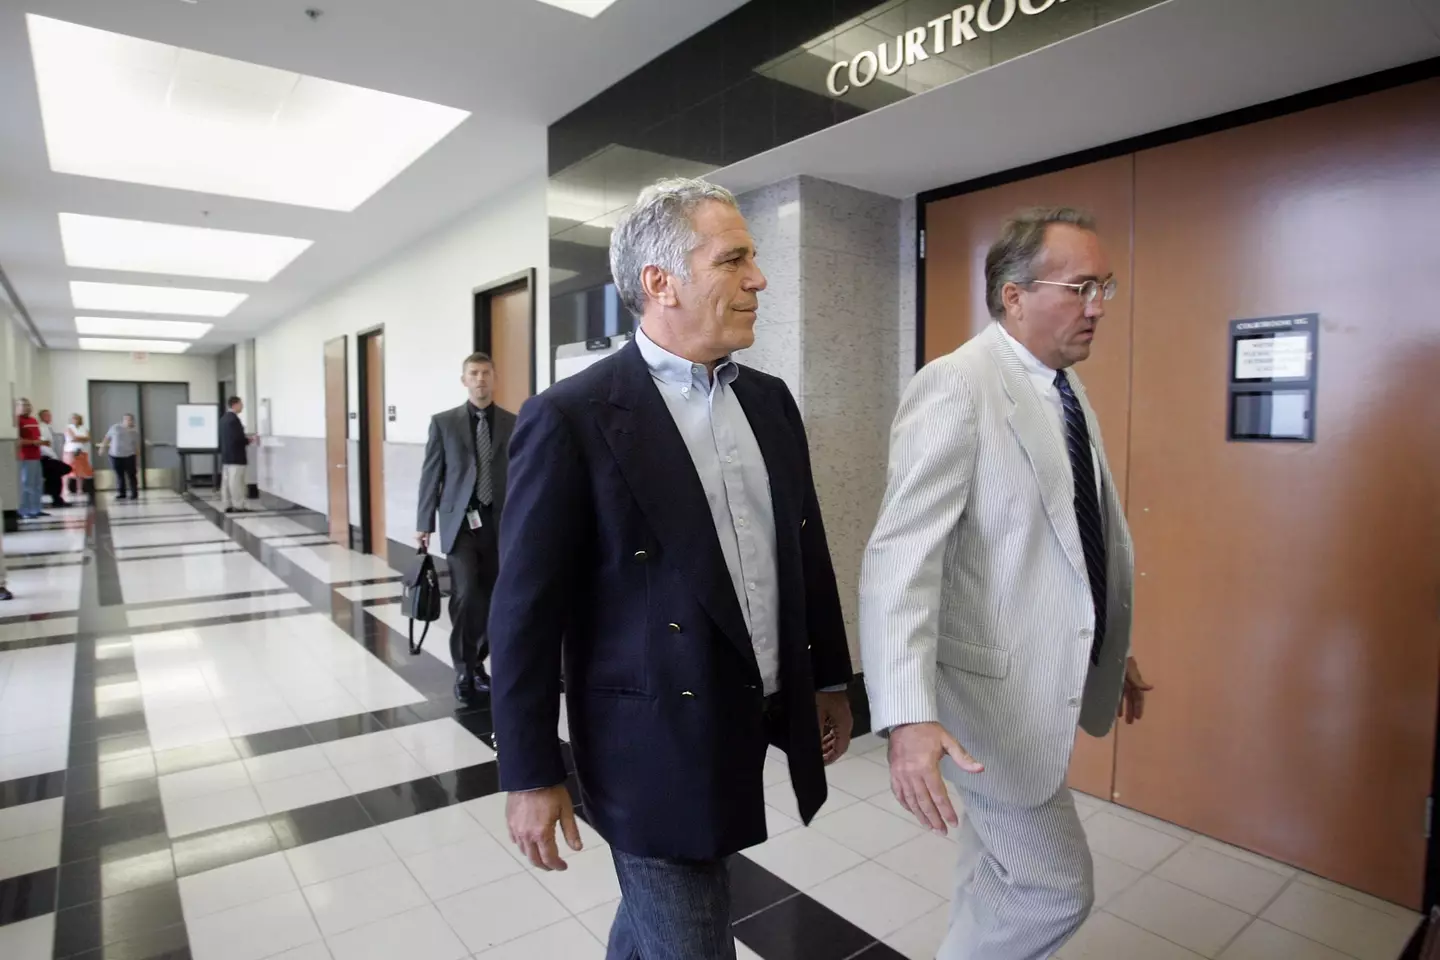 The last court documents regarding allegations about people connected to Jeffrey Epstein are set to be released.